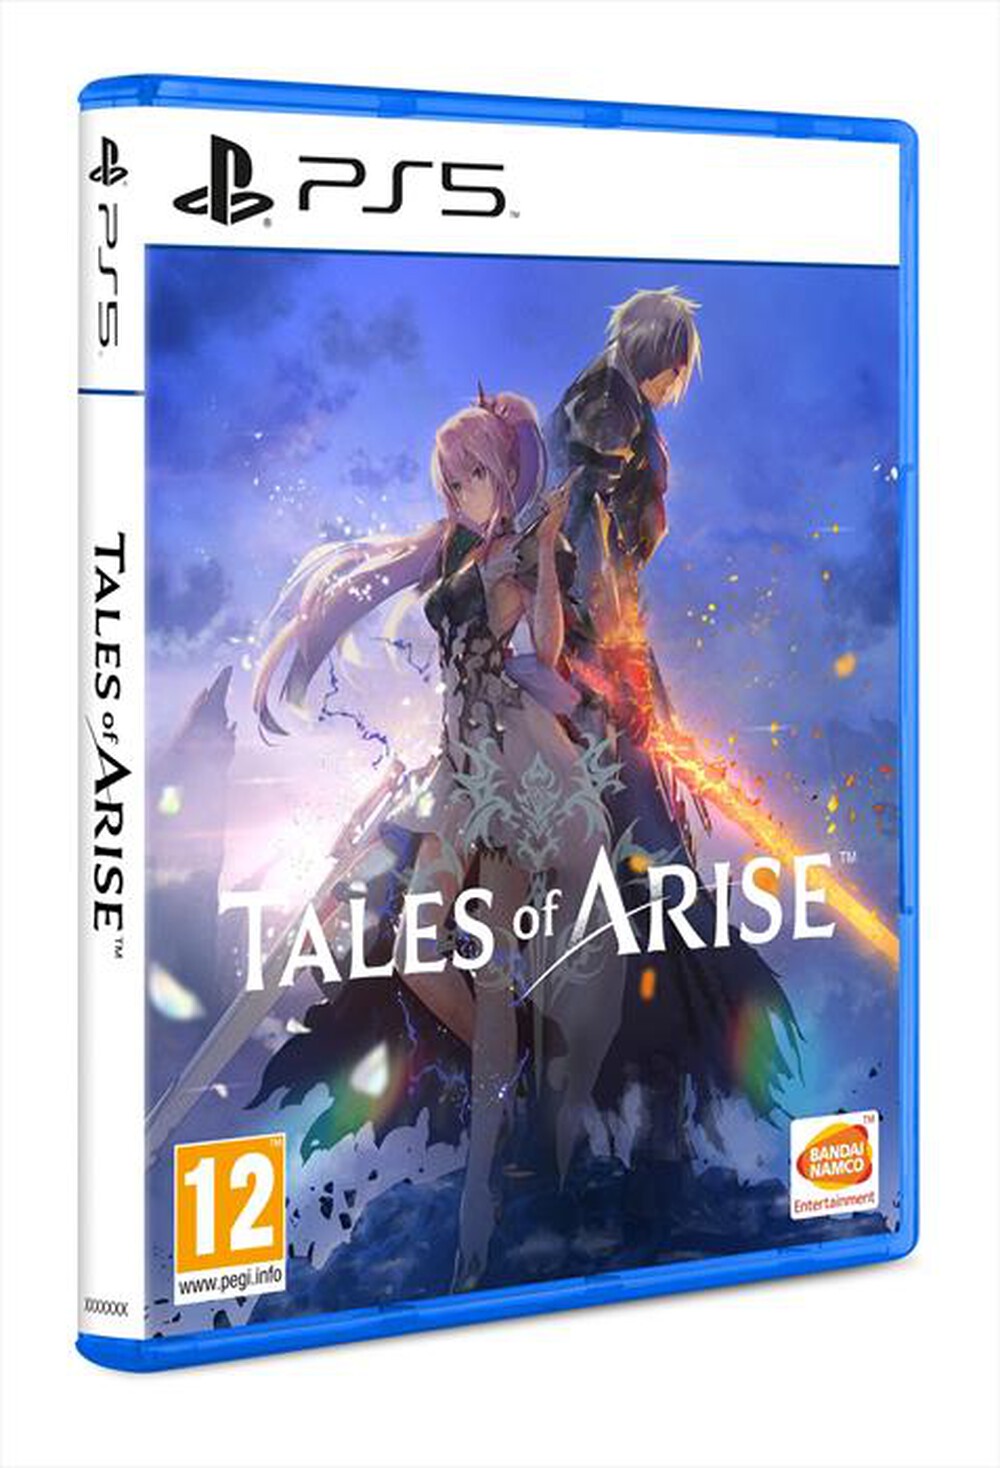 "NAMCO - TALES OF ARISE PS5"